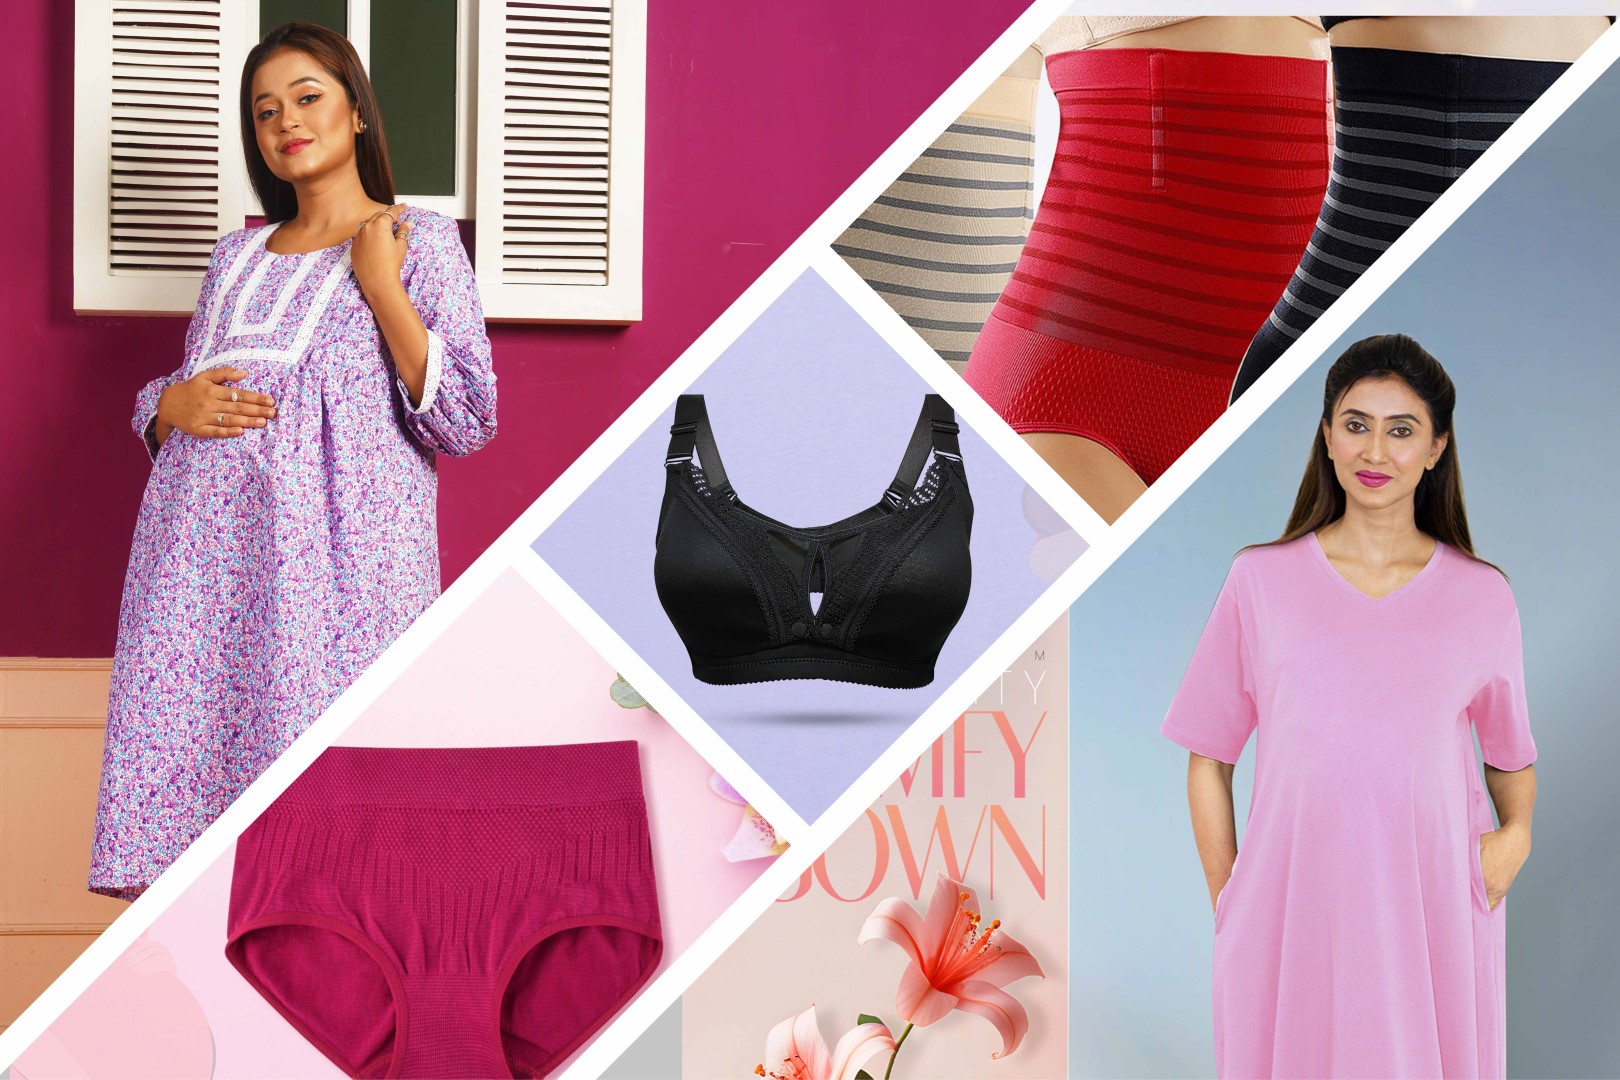 When to Start Wearing Maternity Clothes